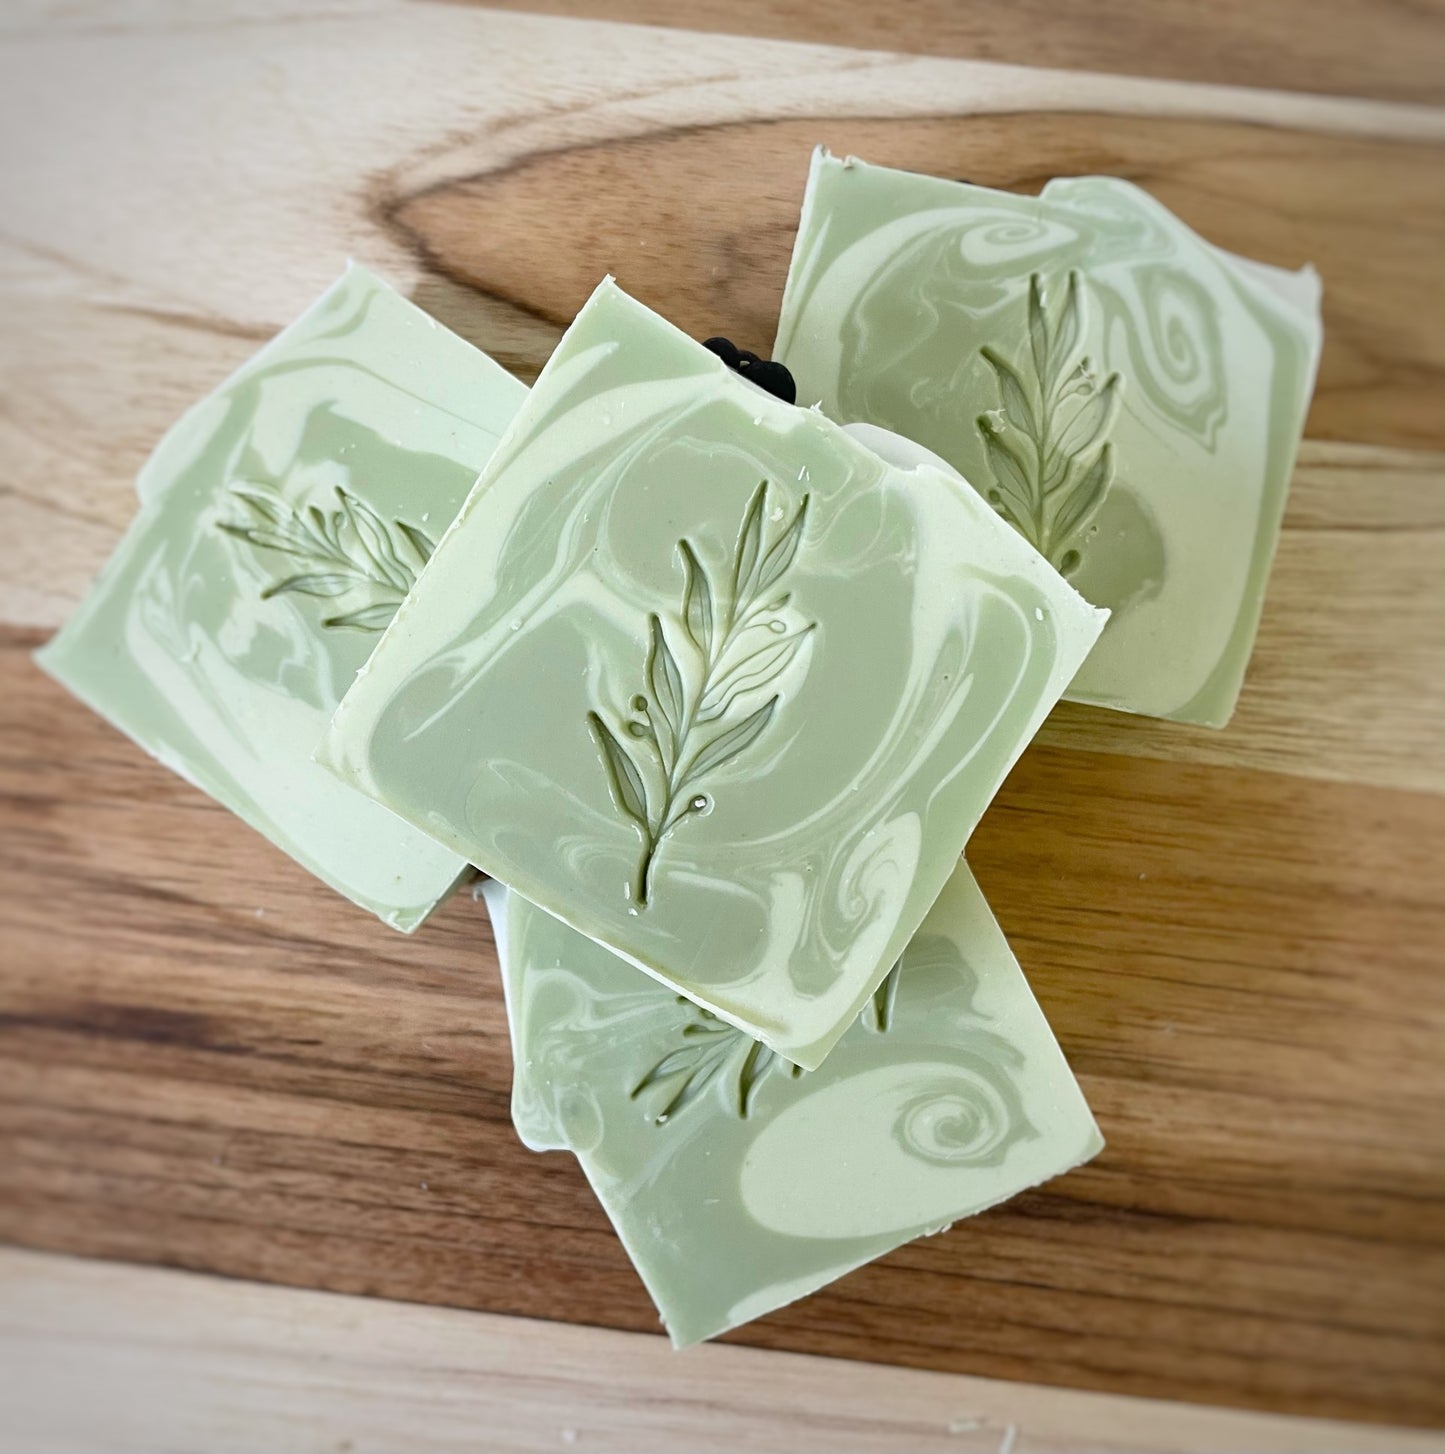 Artisanal green swirl soaps with delicate leaf imprints, arranged beautifully on a wooden surface.